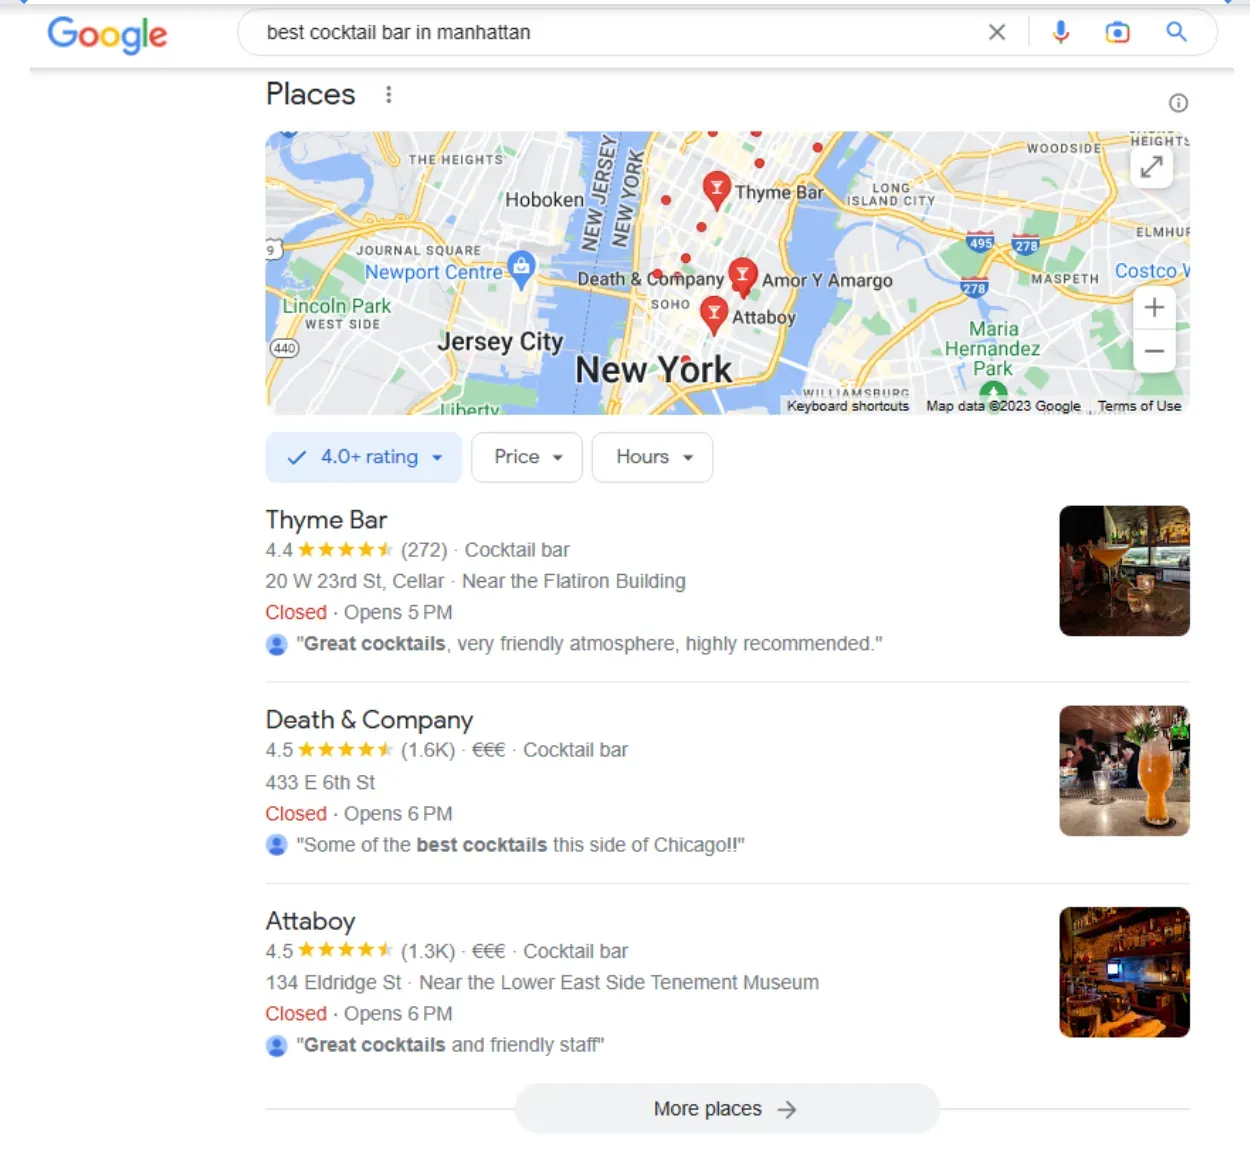 Google local pack result for “best cocktail bars in Manhattan